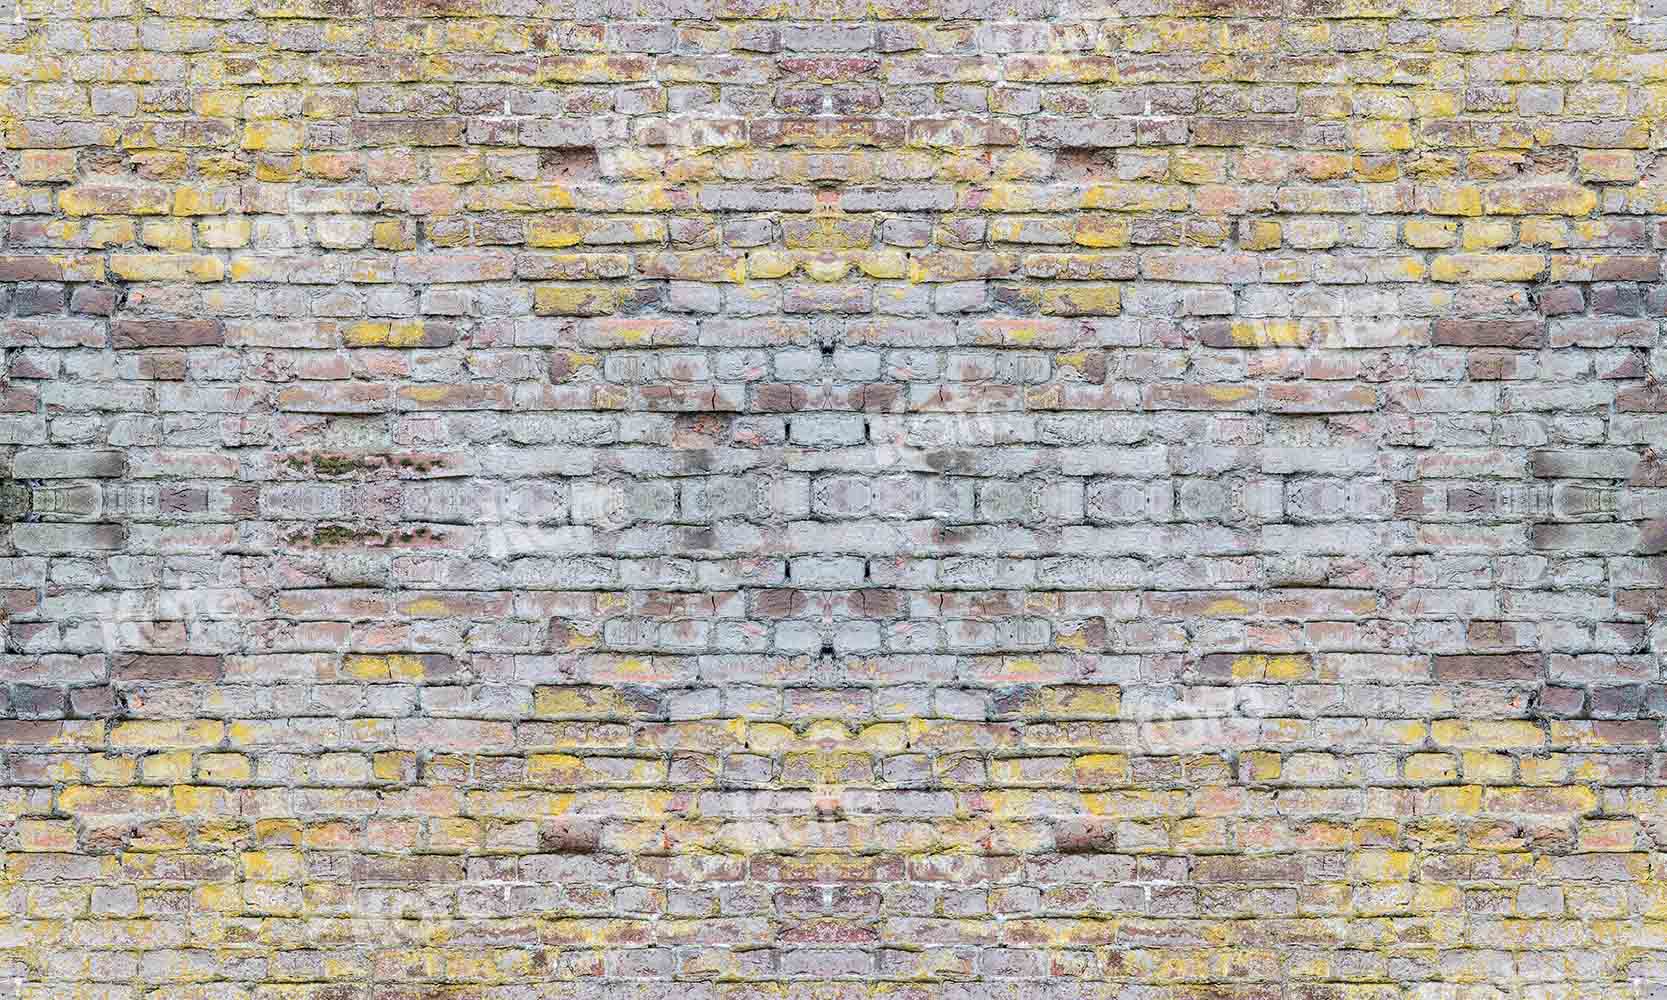 Kate Retro Old Brick Wall Background for Photography Designed by Chain Photography